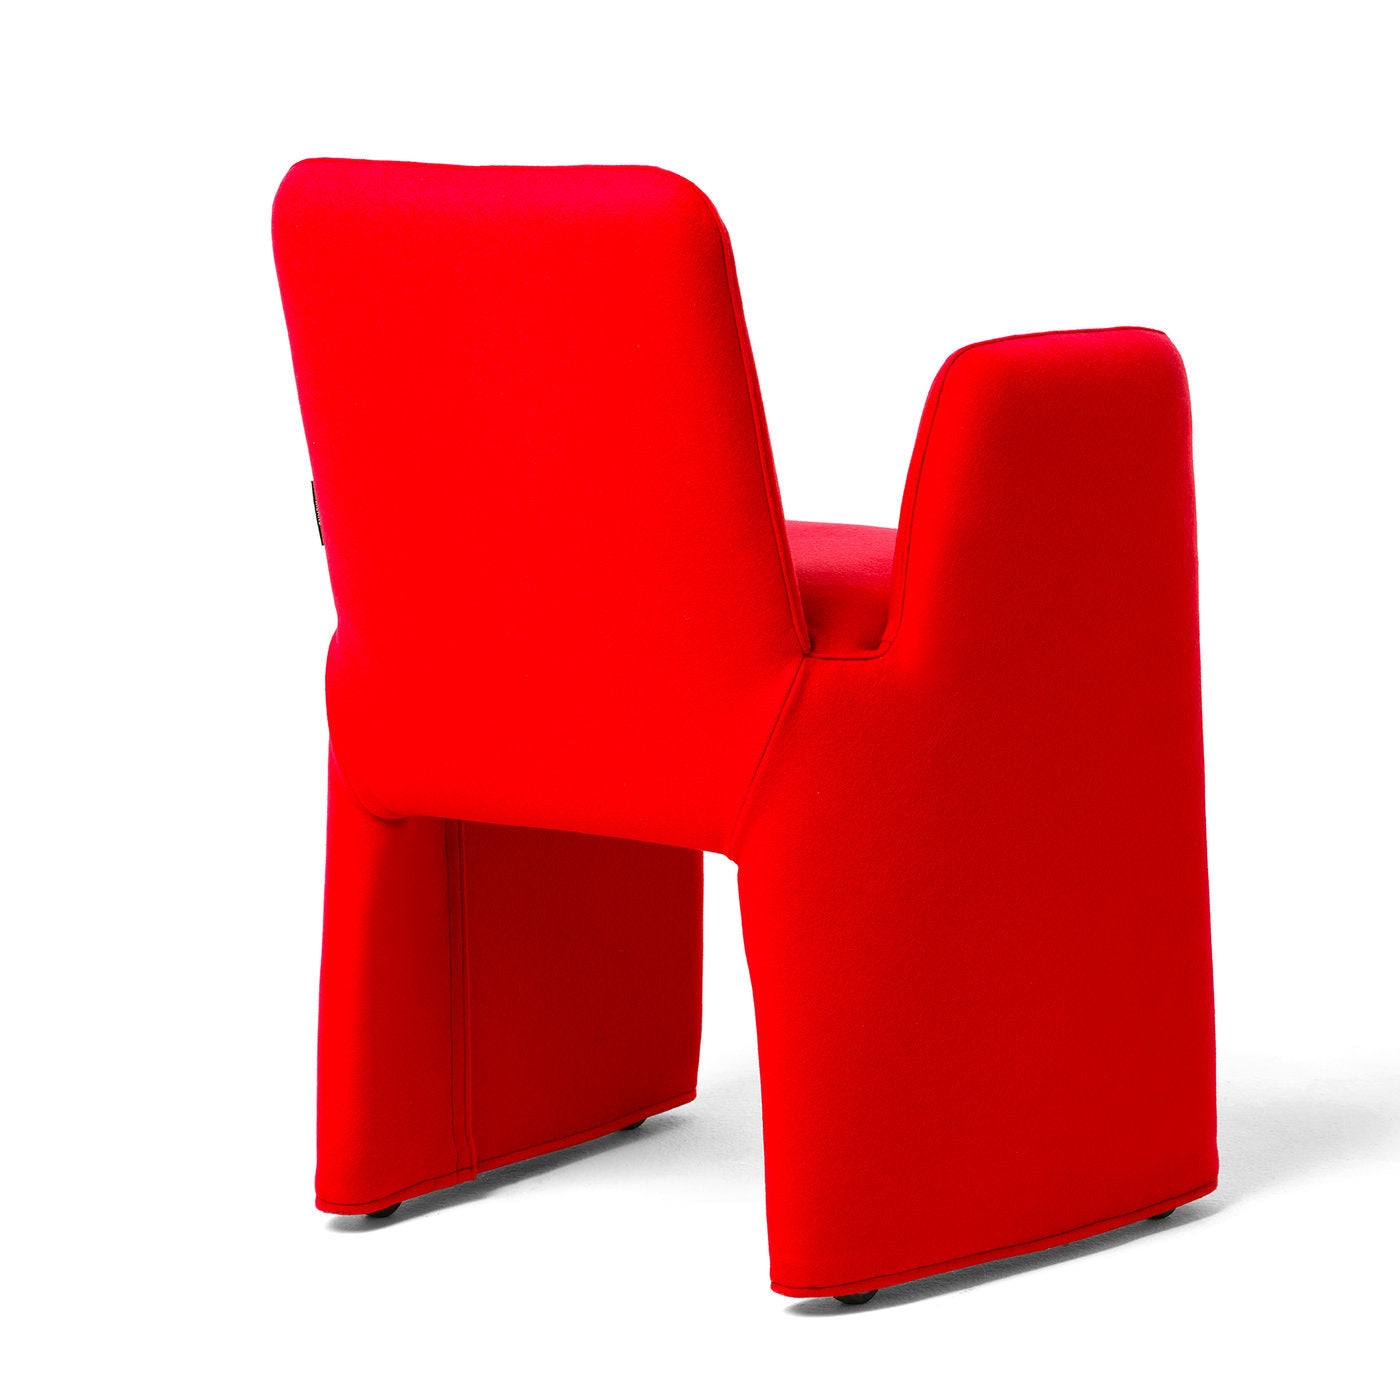 Nova OW Chair With Armrests by Federico Carandini - Alternative view 1